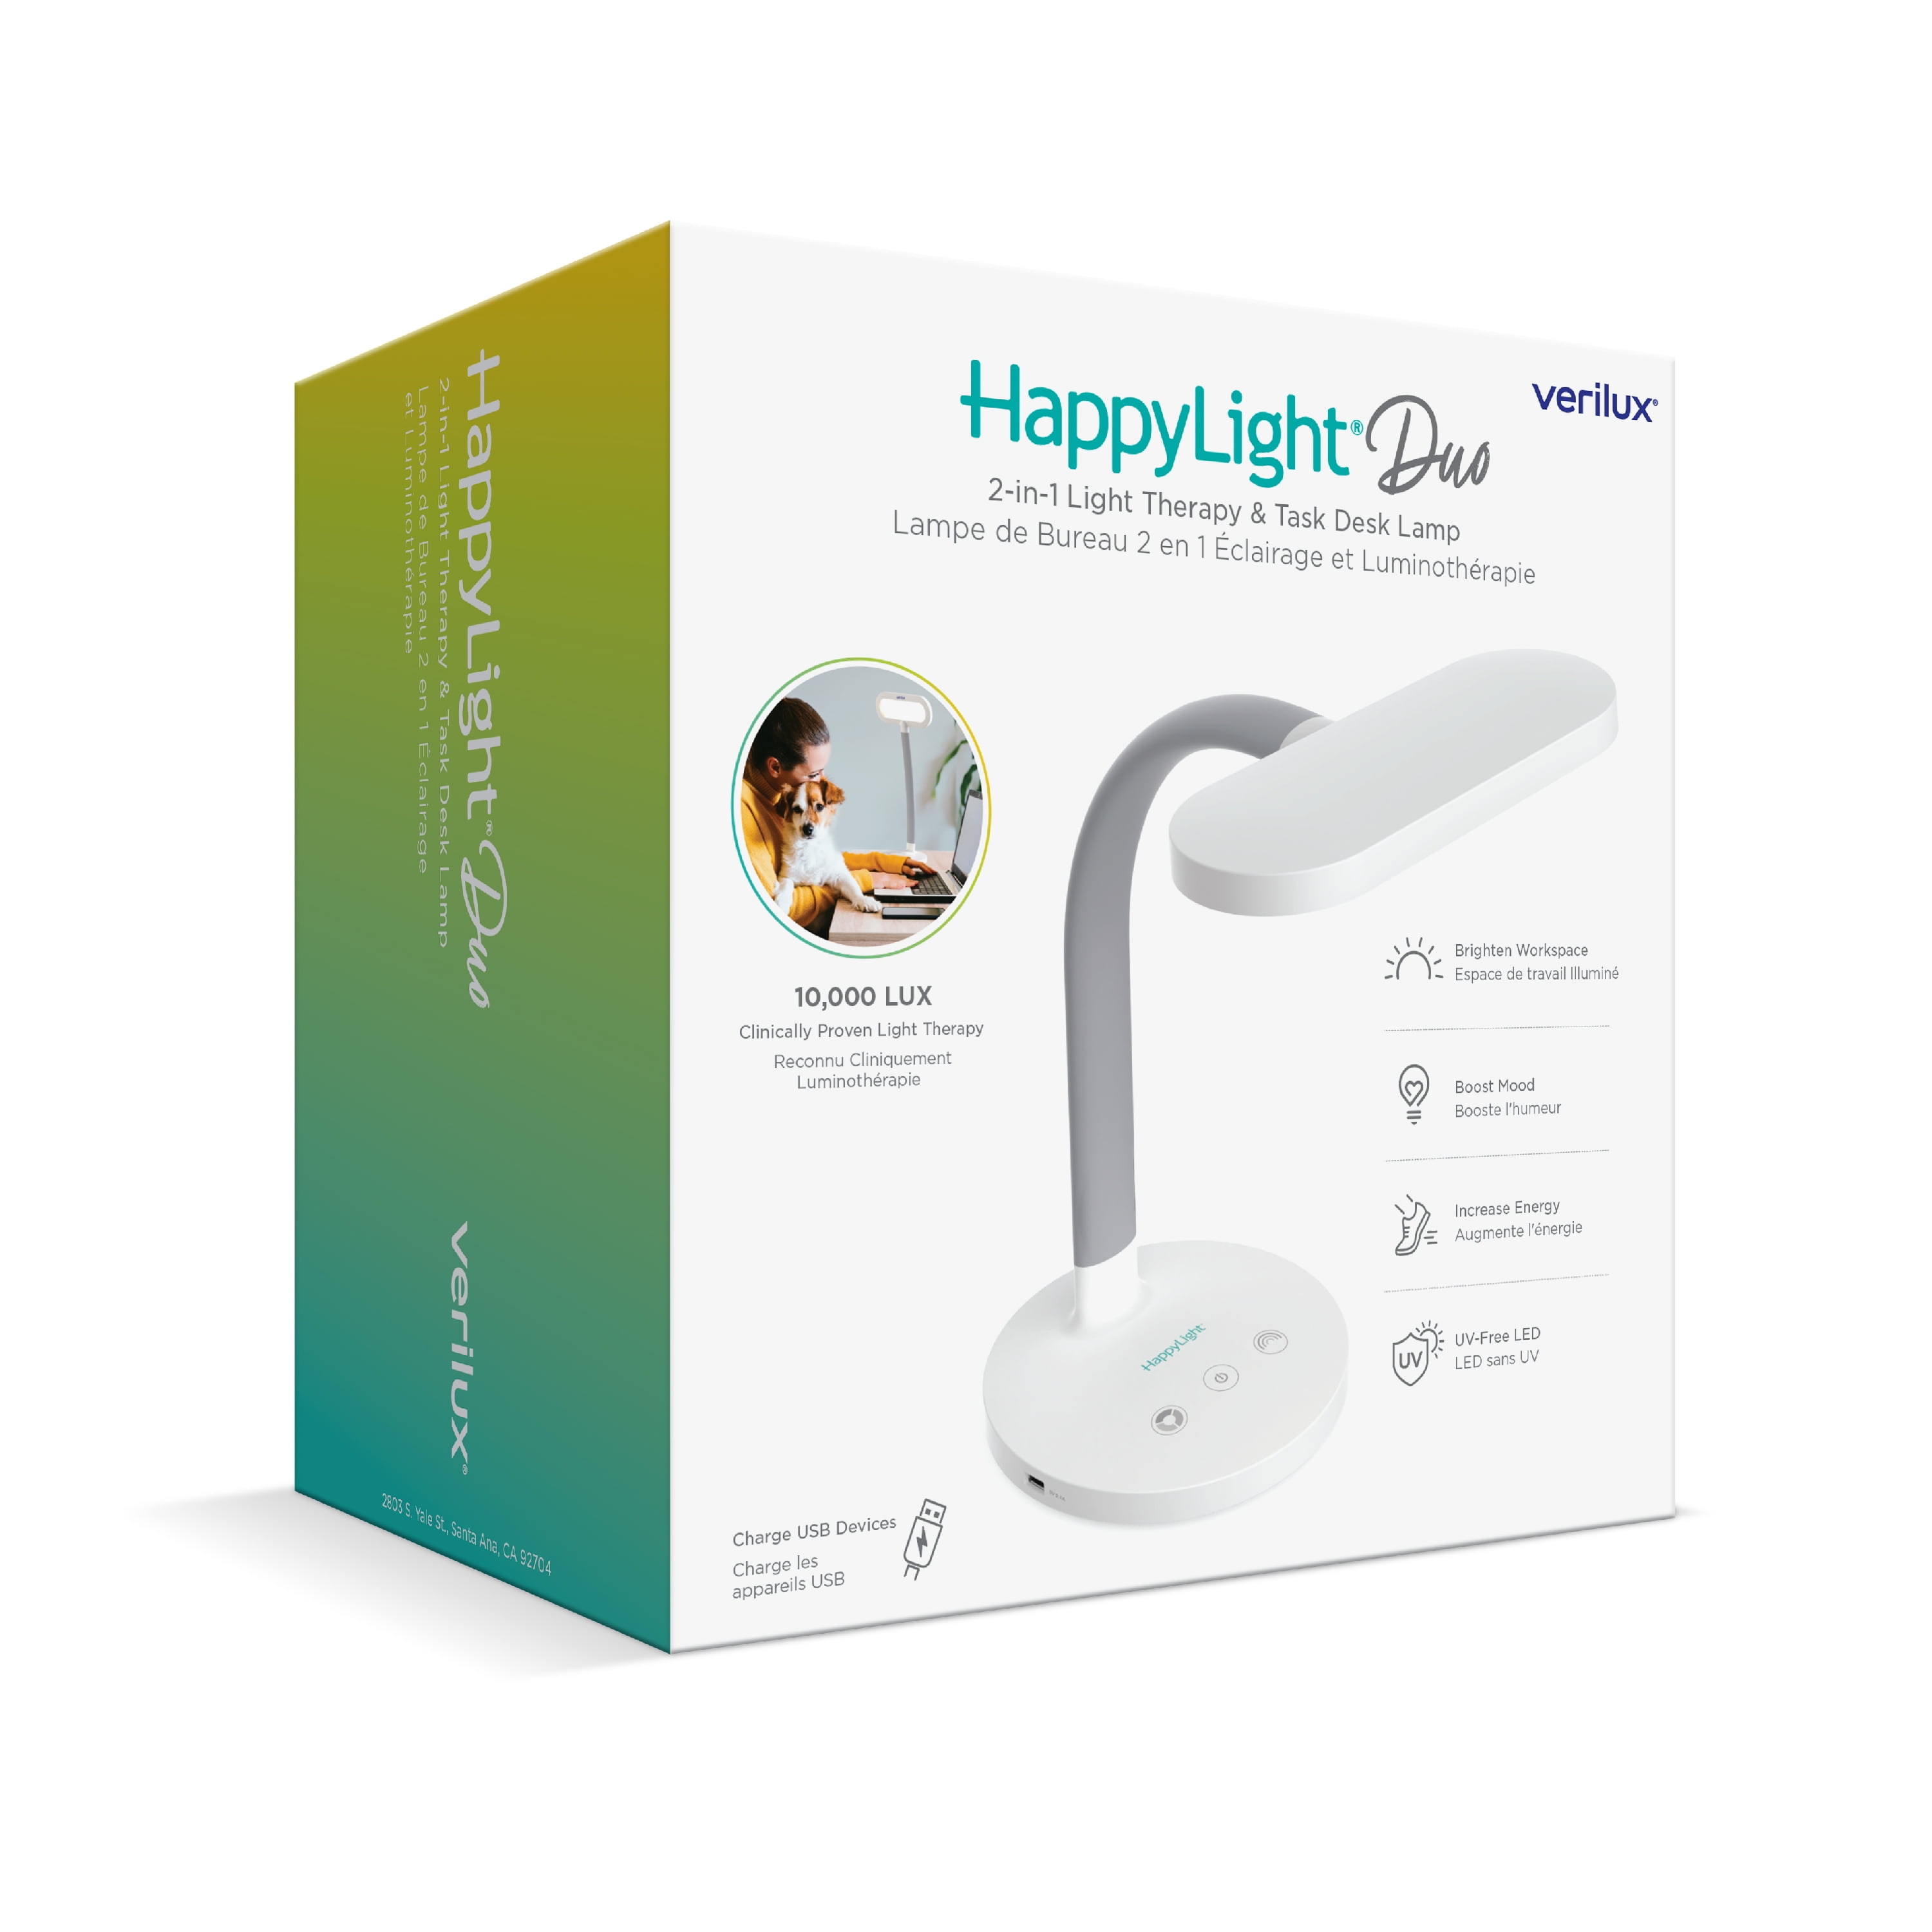 HappyLight® Lucent™ Light Therapy Lamp